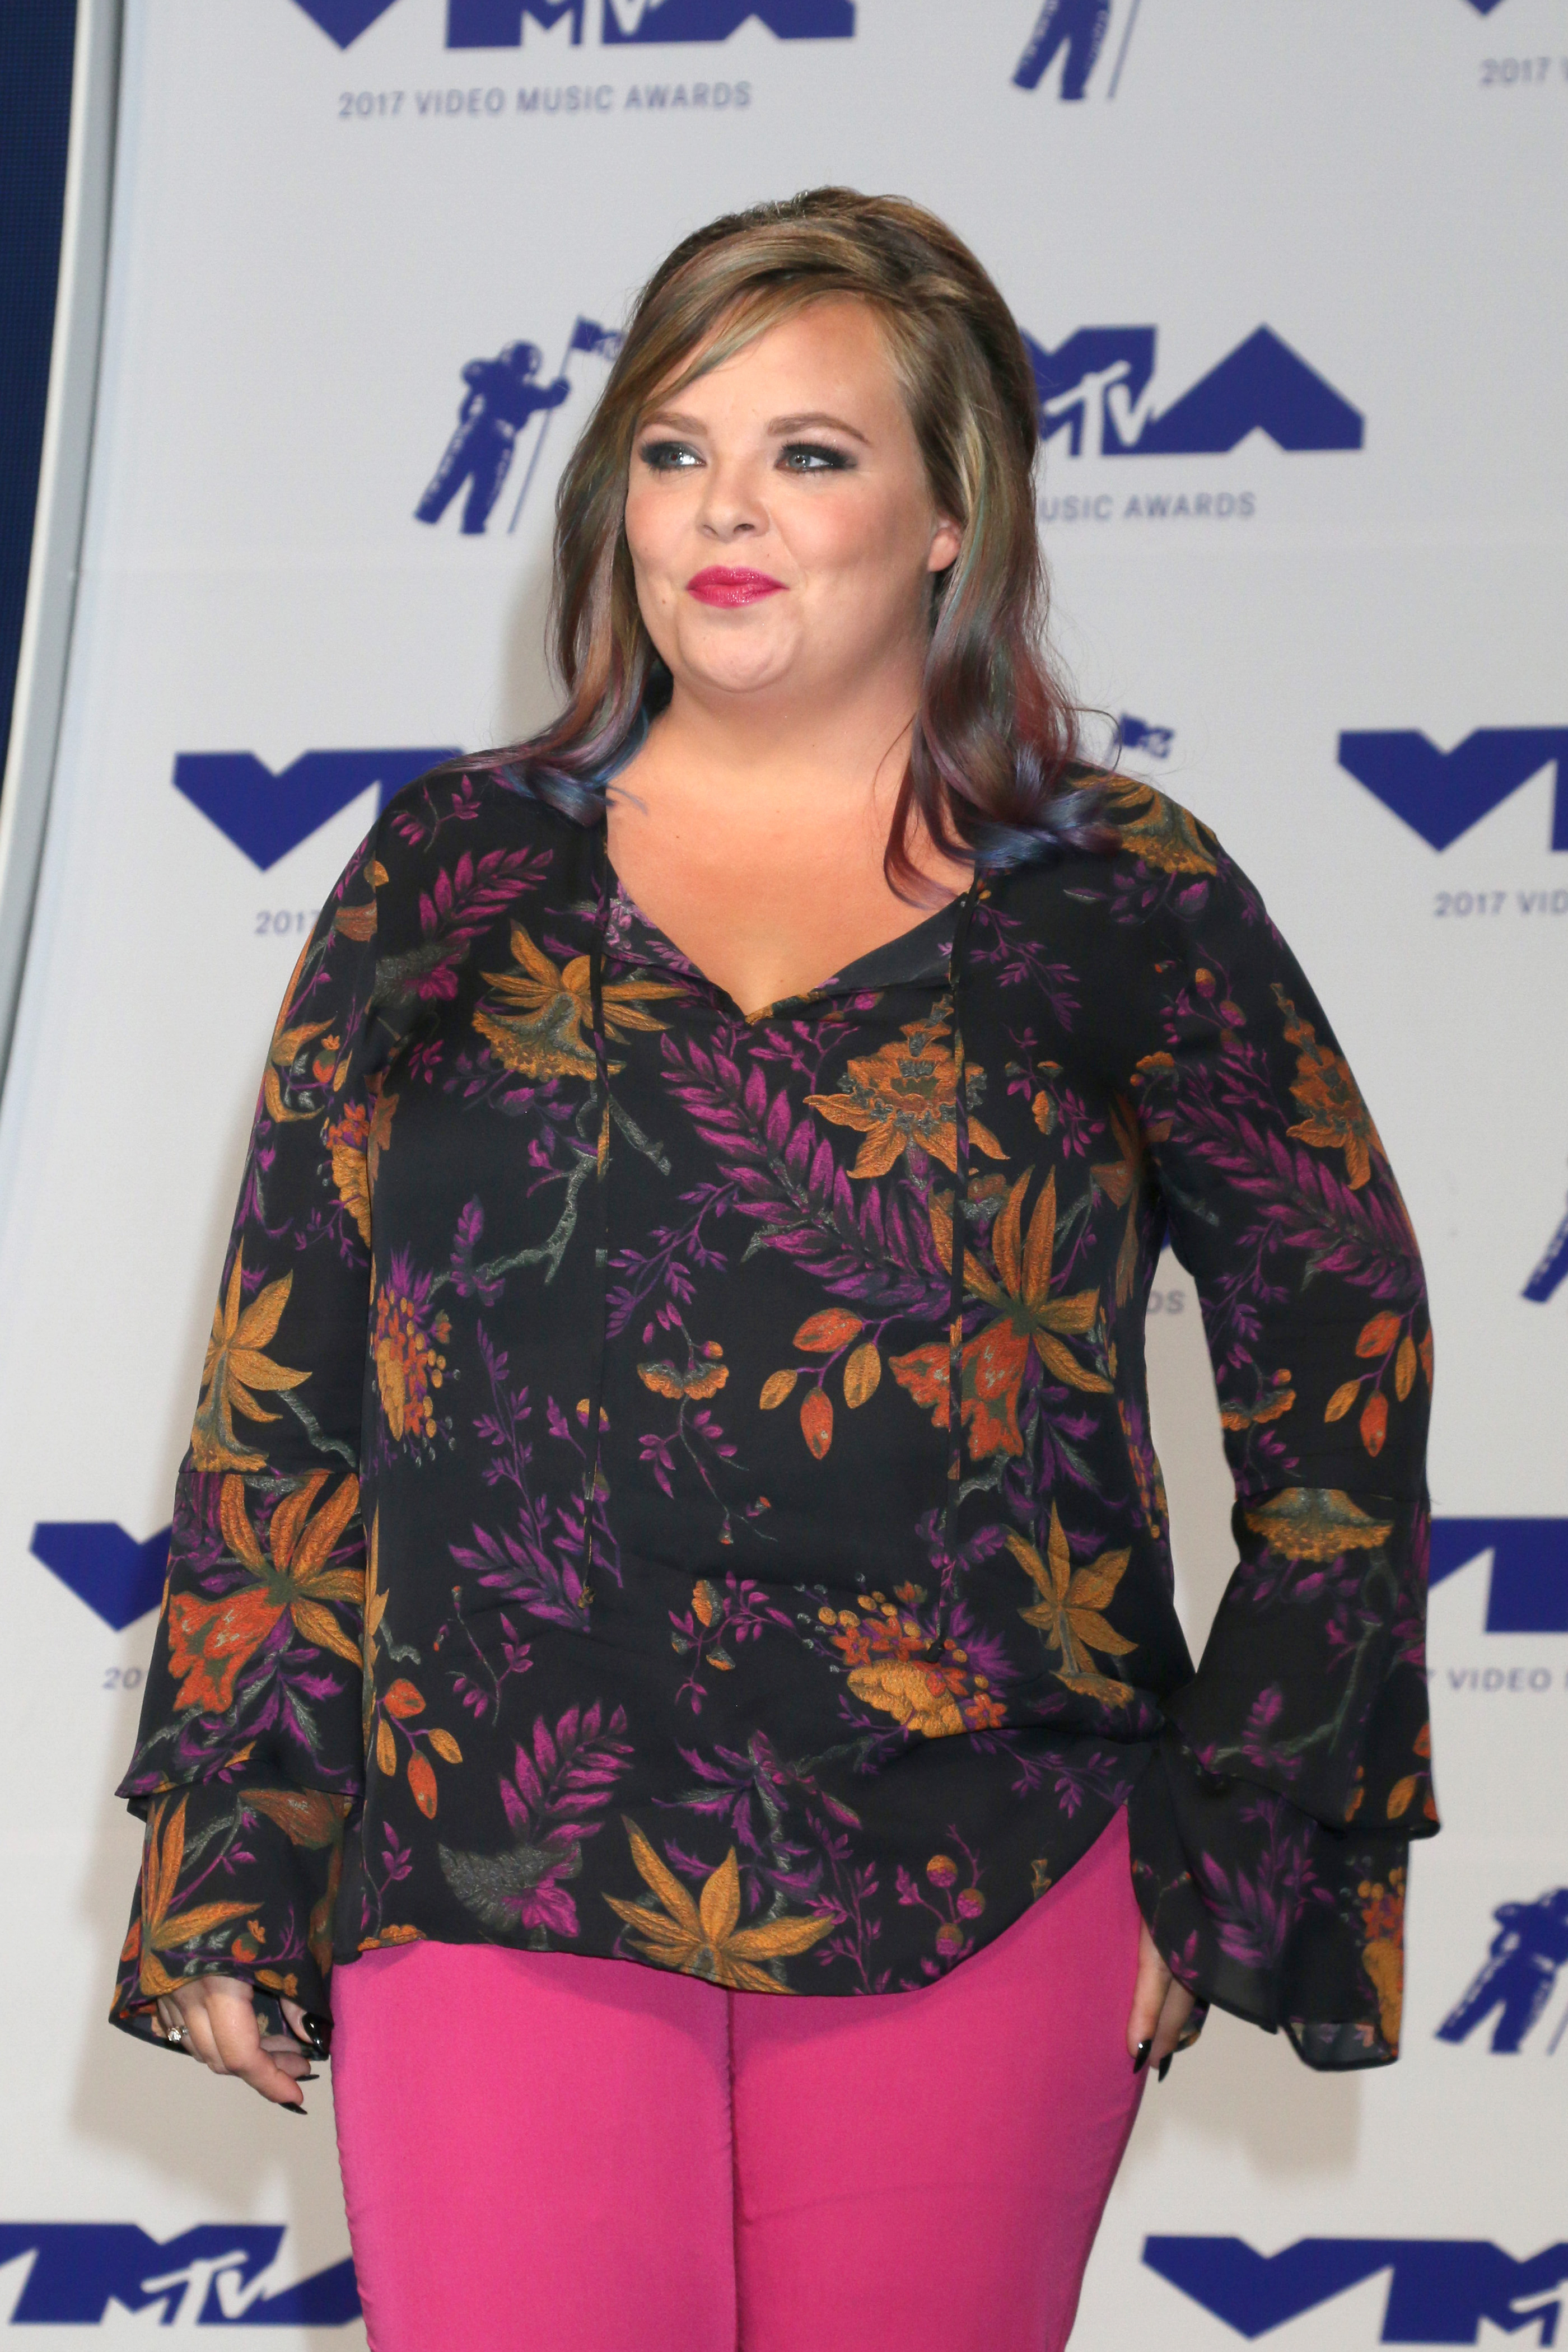 A photo showing Catelynn Lowell at the 2017 MTV Video Music Awards sporting a multicolored blouse and pink color blouse.